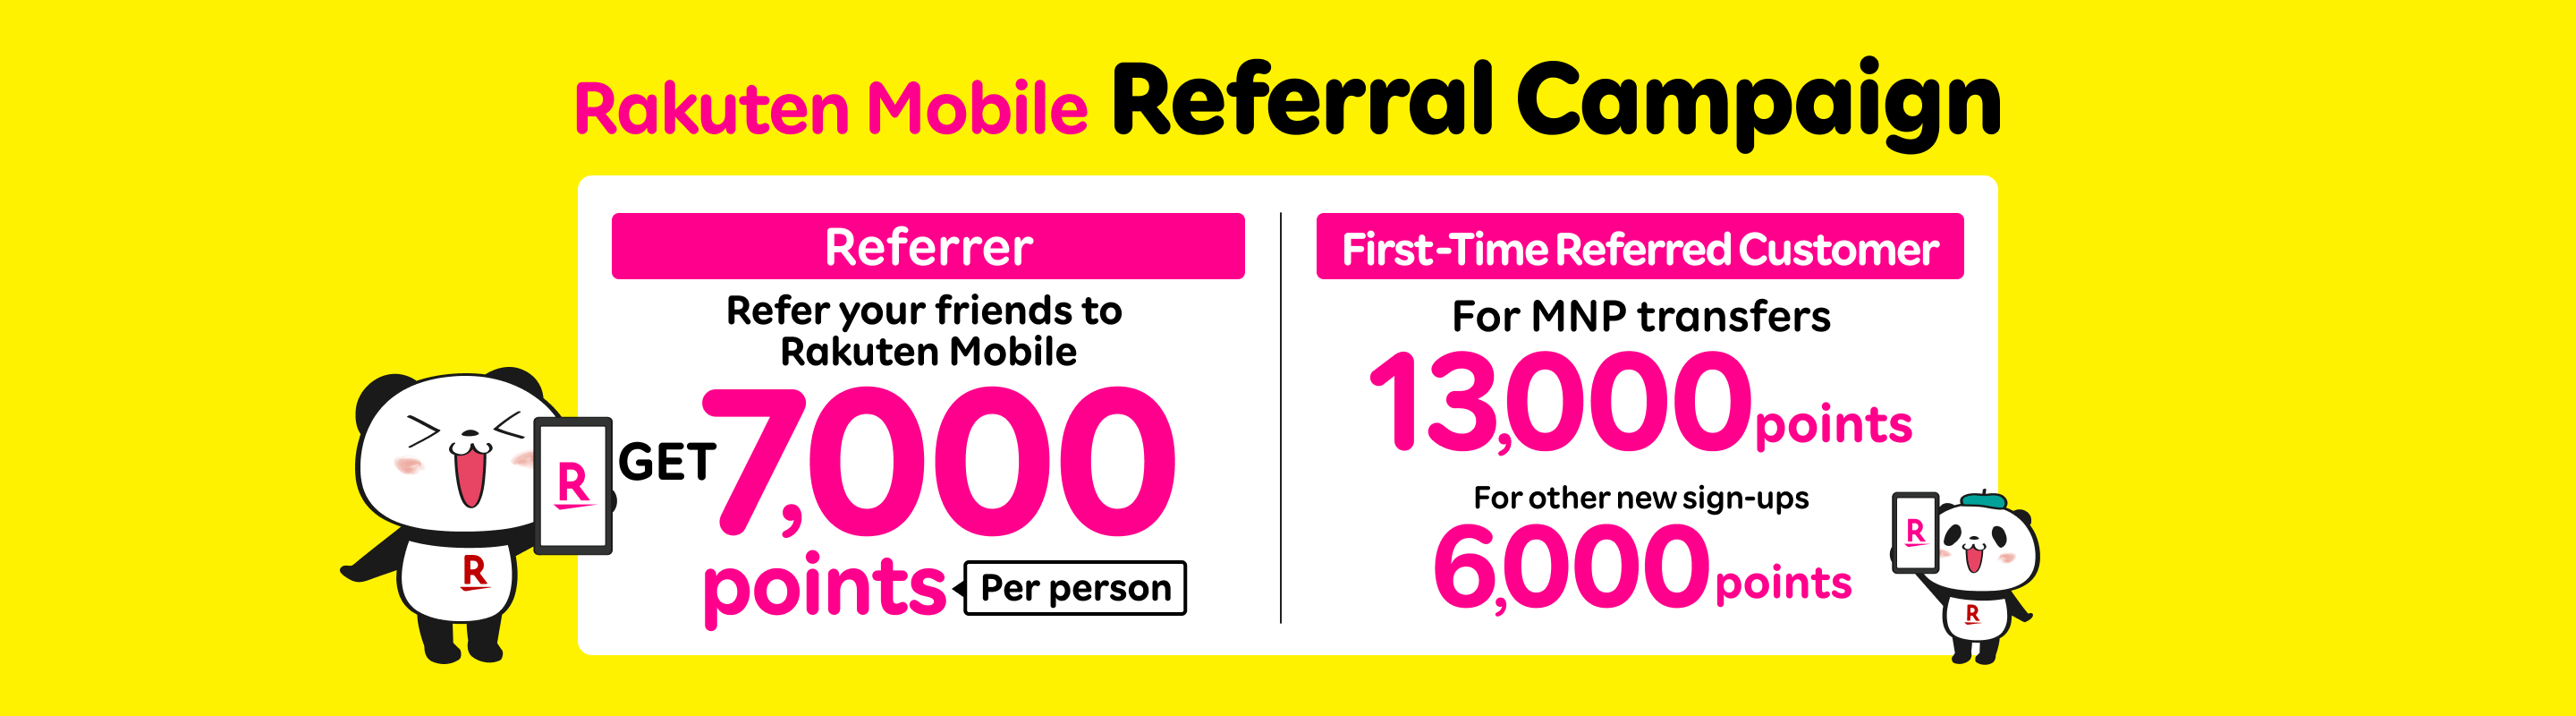 Refer your family and friends to Rakuten Mobile and get 7,000 points per person. The referred friends will also receive 13,000 points for MNP transfers, or 6,000 points for other new sign-ups. 